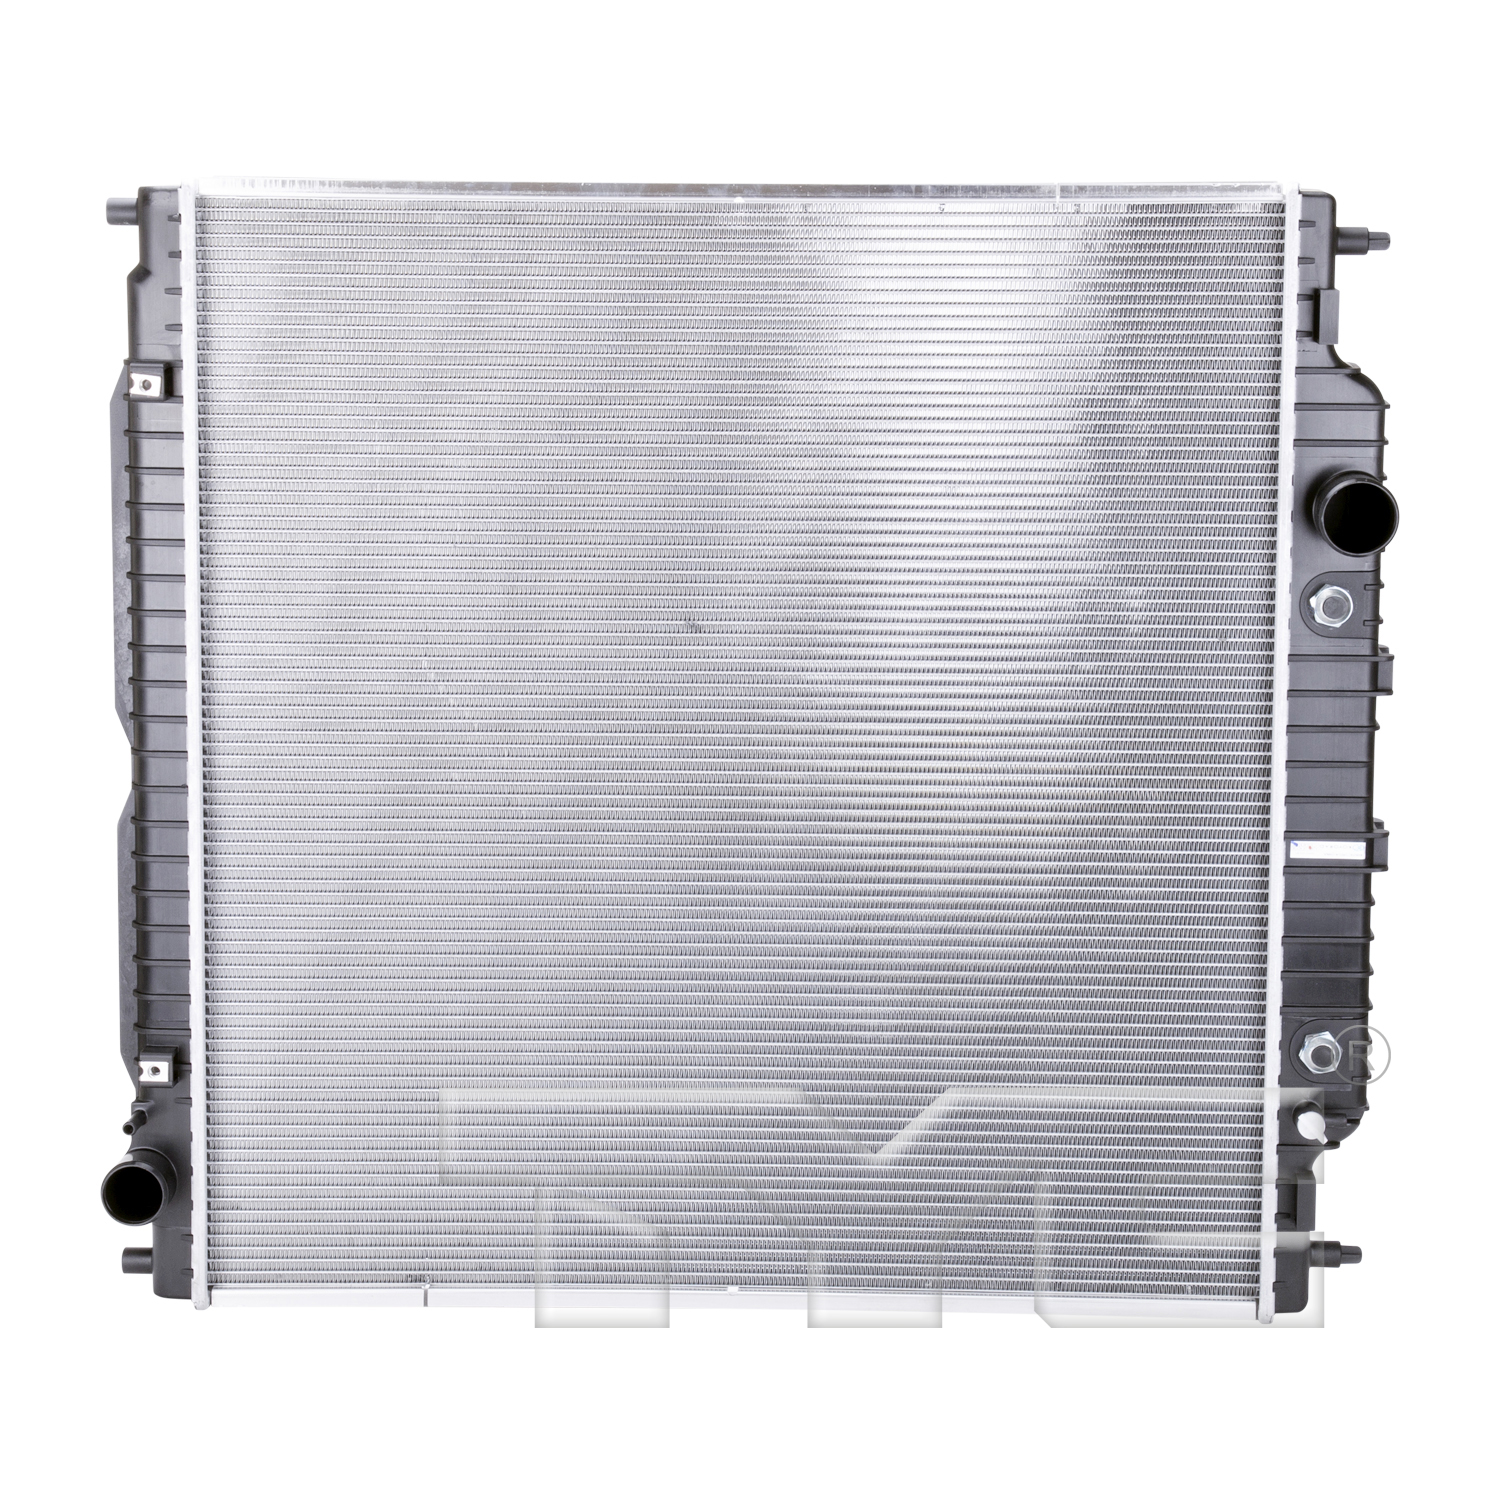 Aftermarket RADIATORS for FORD - F-350 SUPER DUTY, F-350 SUPER DUTY,05-07,Radiator assembly